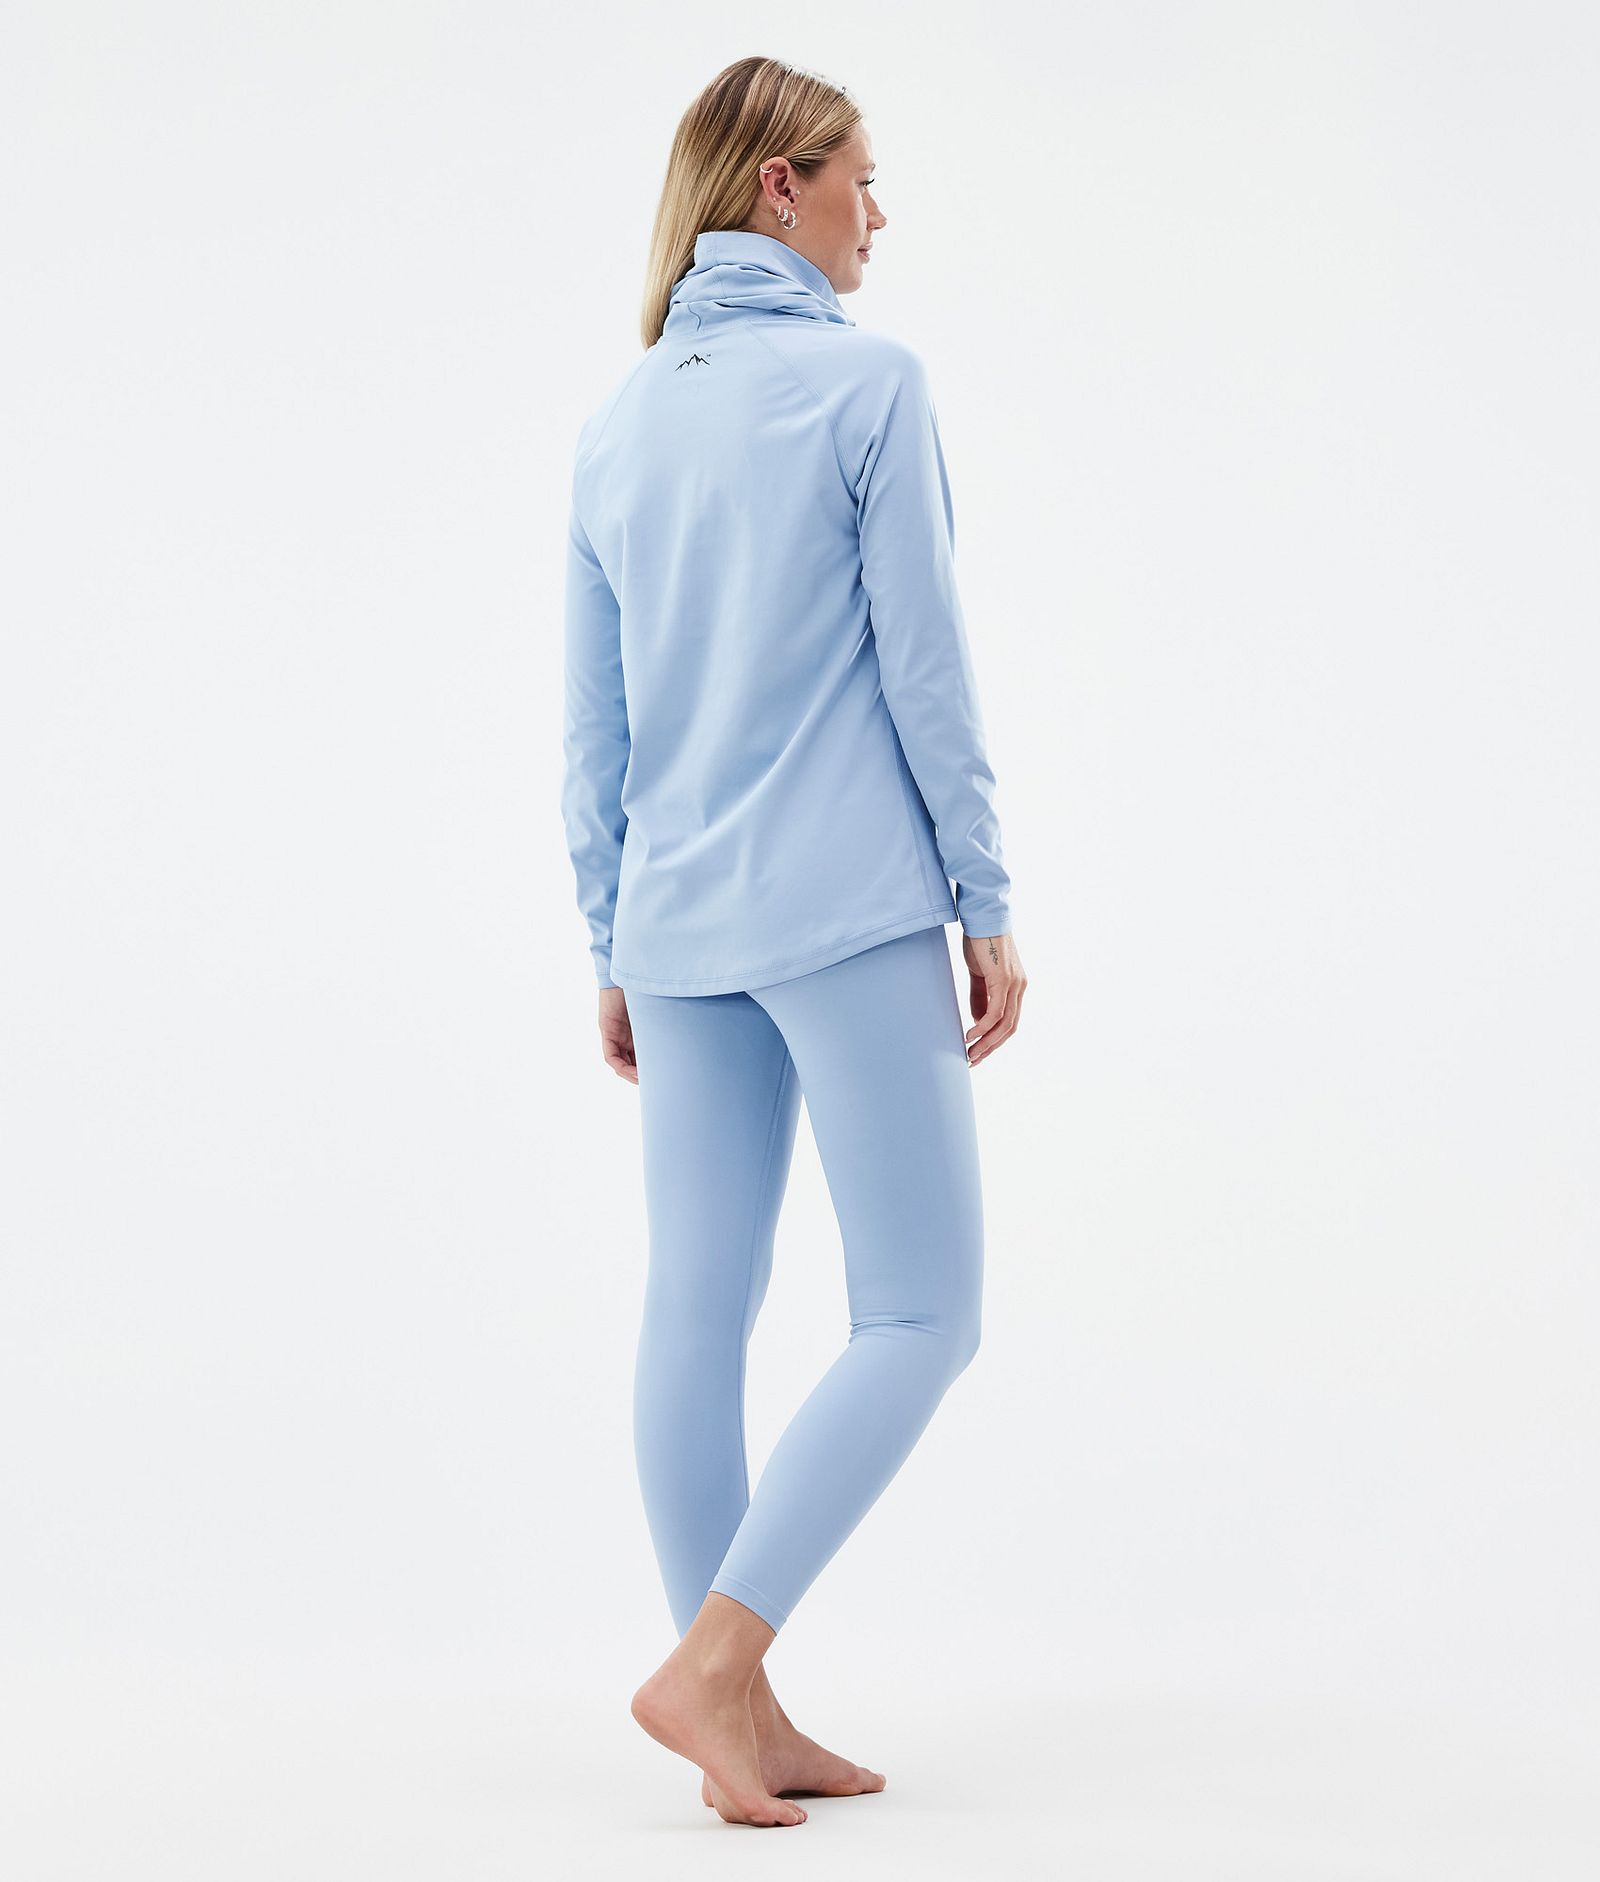 Snuggle W Base Layer Top Women 2X-Up Light Blue, Image 4 of 7